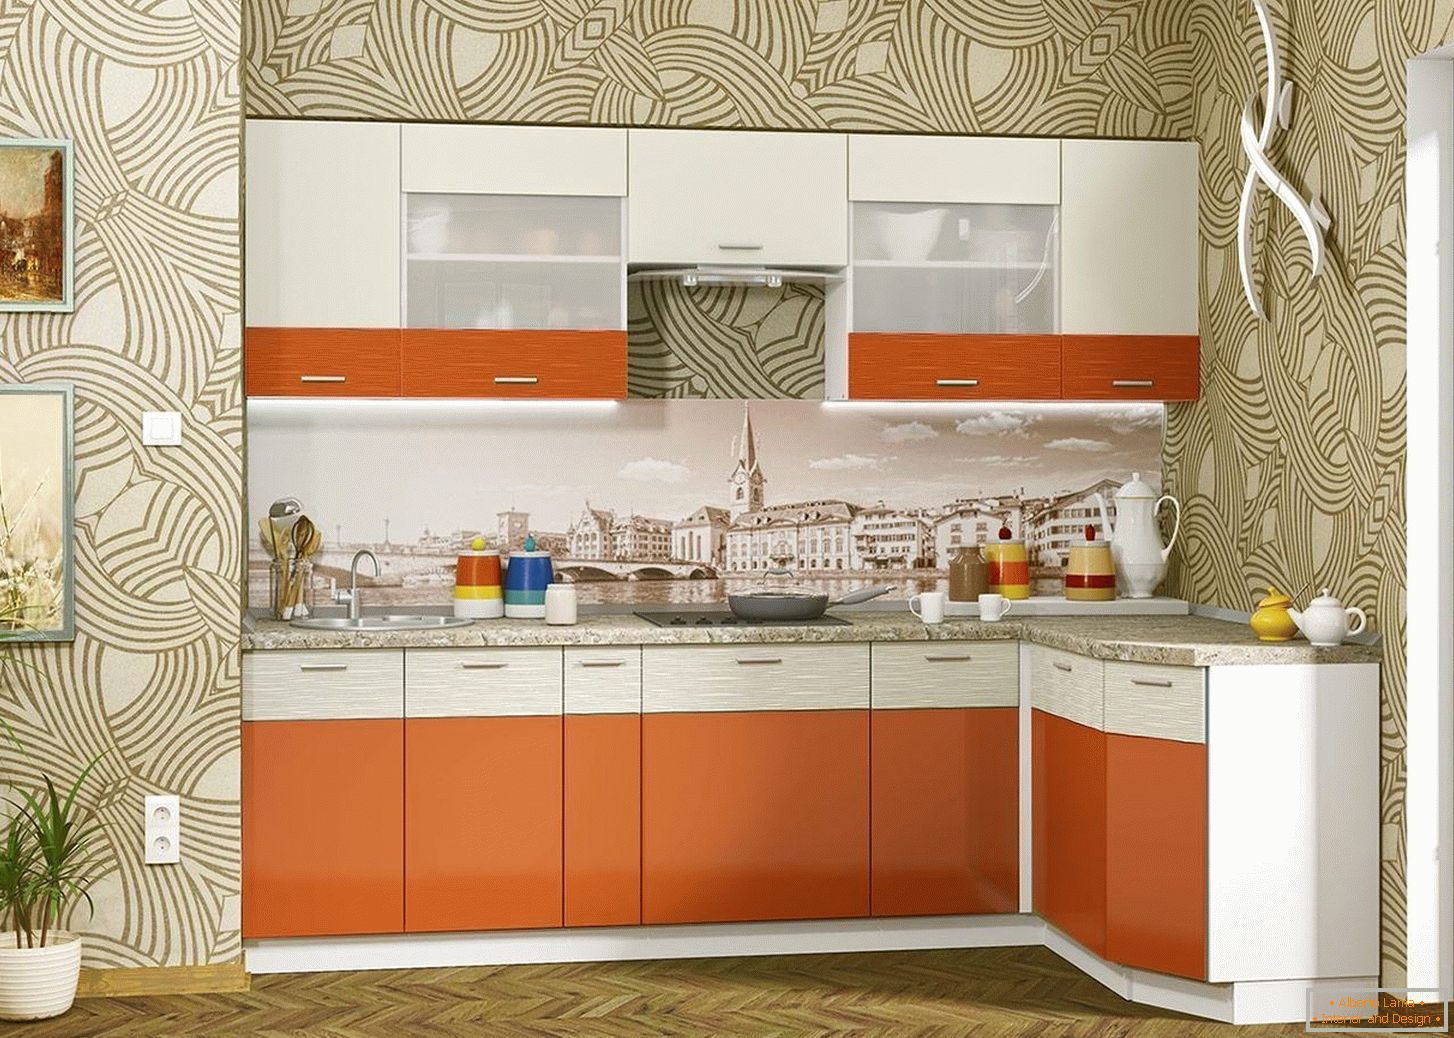 Compact kitchen in orange color